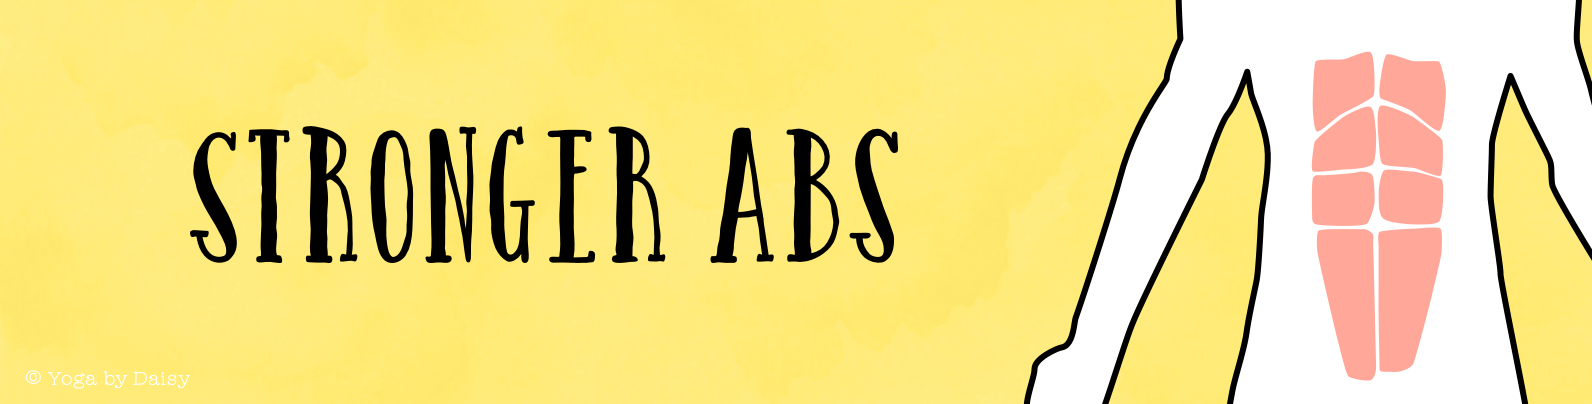 Stronger Abs